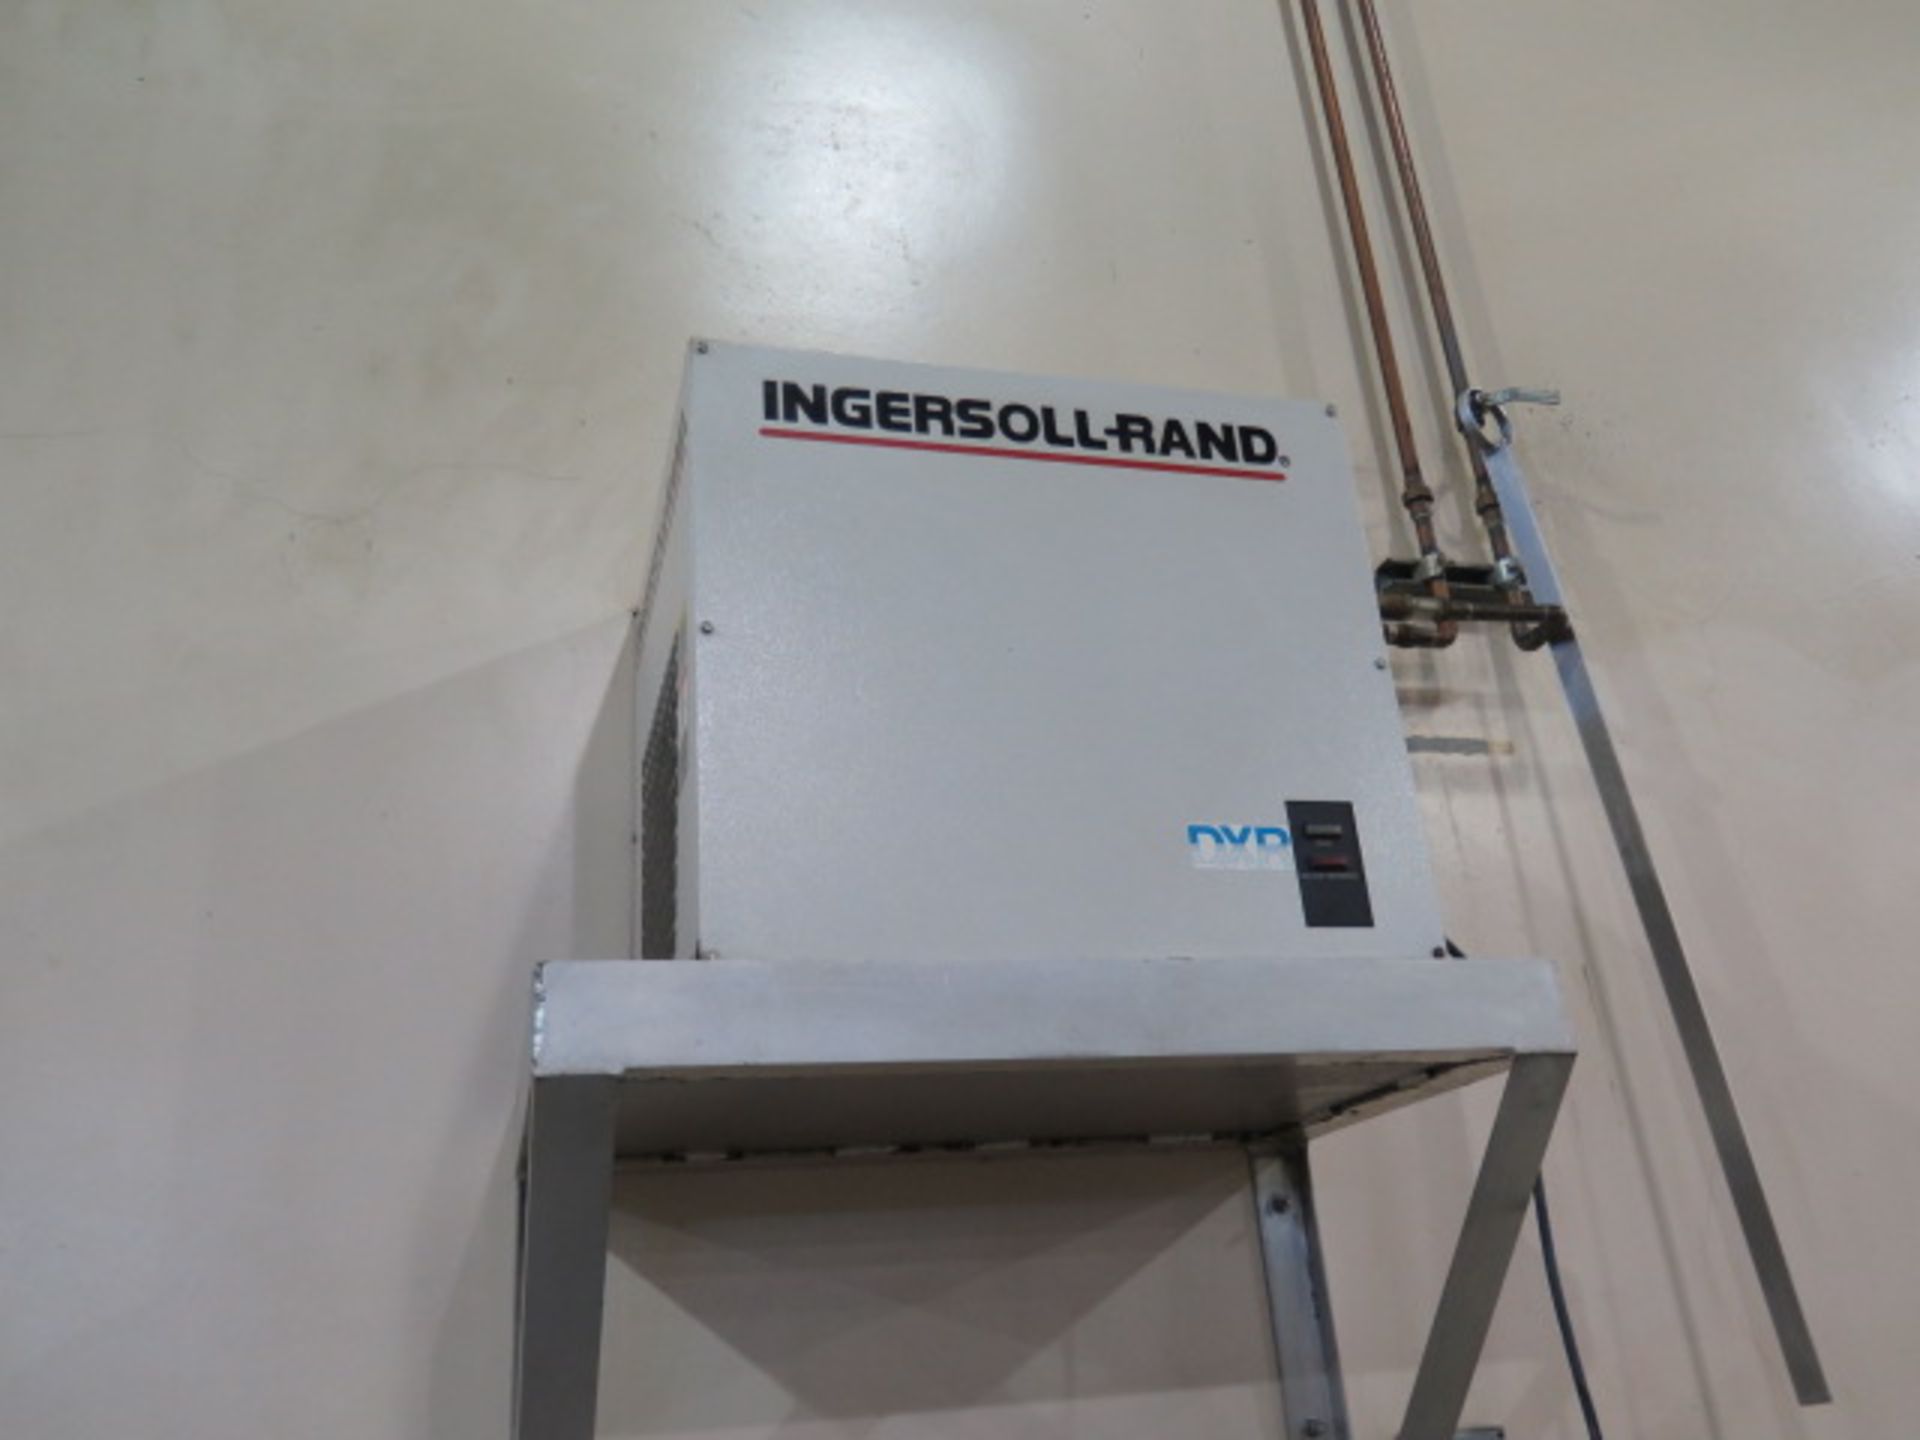 Ingersoll Rand DXR Refrigerated Air Dryer (ON WALL) (SOLD AS-IS - NO WARRANTY)